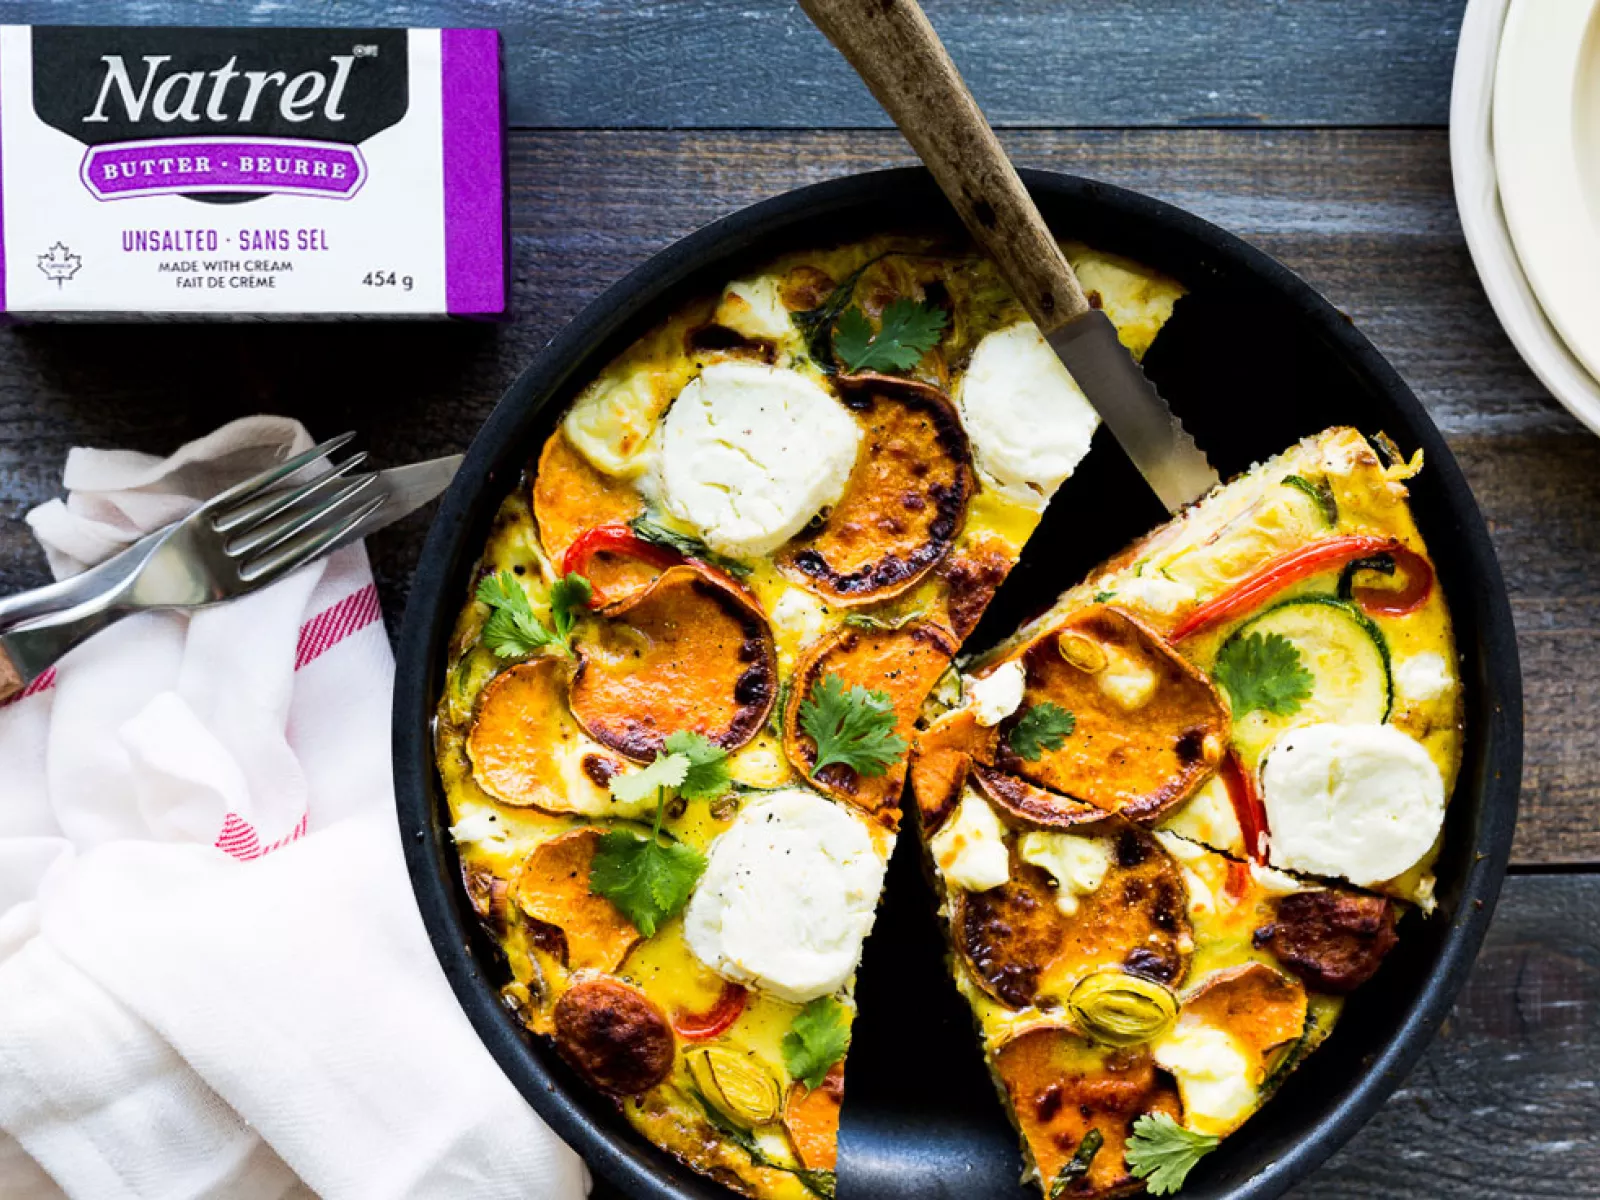 Vegetable frittata with sausage and goat cheese